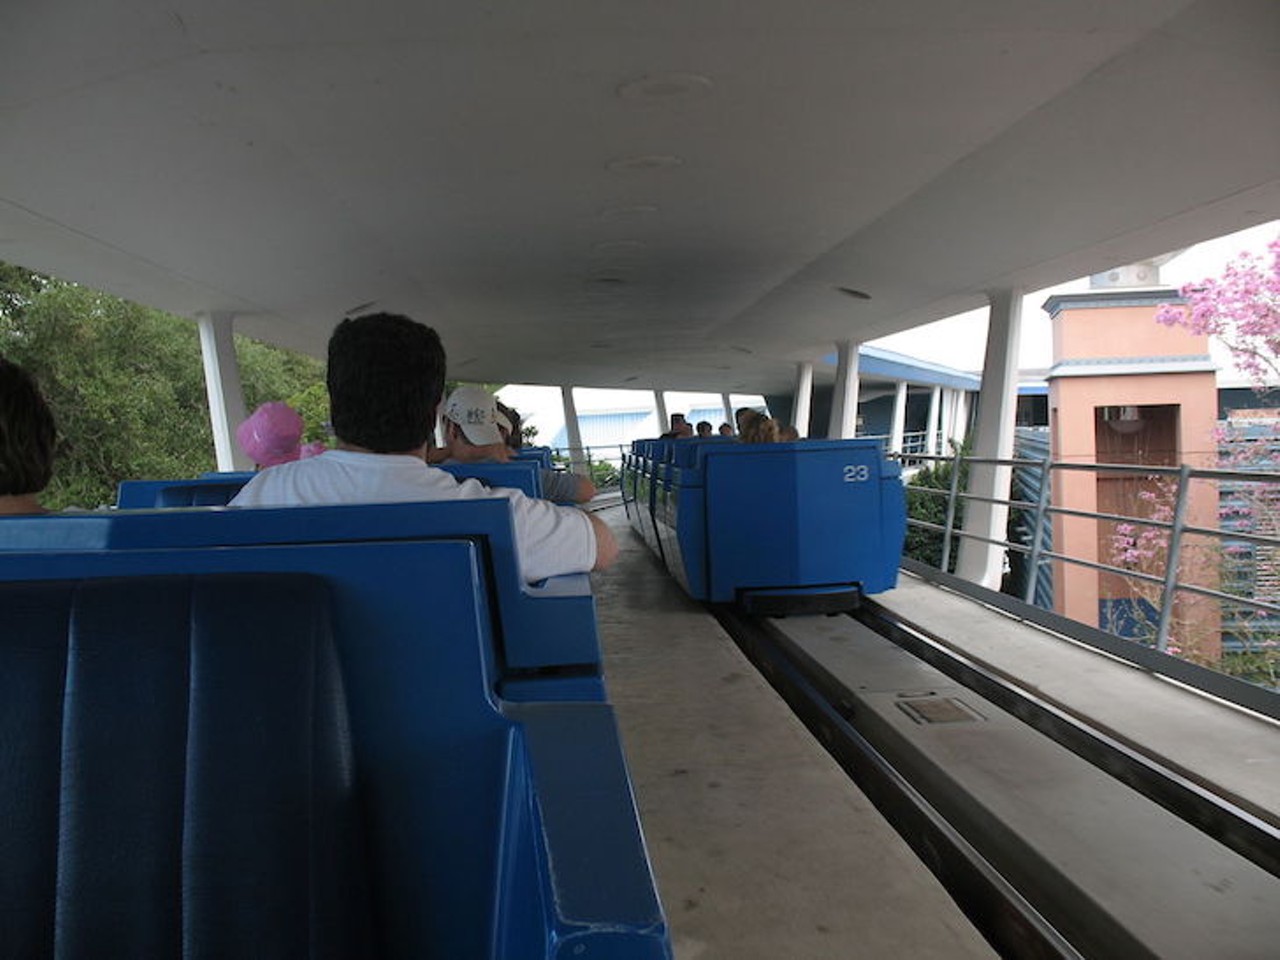 High-five guests on passing PeopleMover 
Unlike newer rides with the envelope of safety, the PeopleMover comes from a simpler time where sticking your hand out of a moving ride could mean losing it. There are a few times, like just before entering Space Mountain, where the cars pass each other just close enough that sticking your hand out could get you a high-five from other guests. The simple joy of a high-five during the middle of a slow ride is surprisingly satisfying. 
Photo via Wikipedia